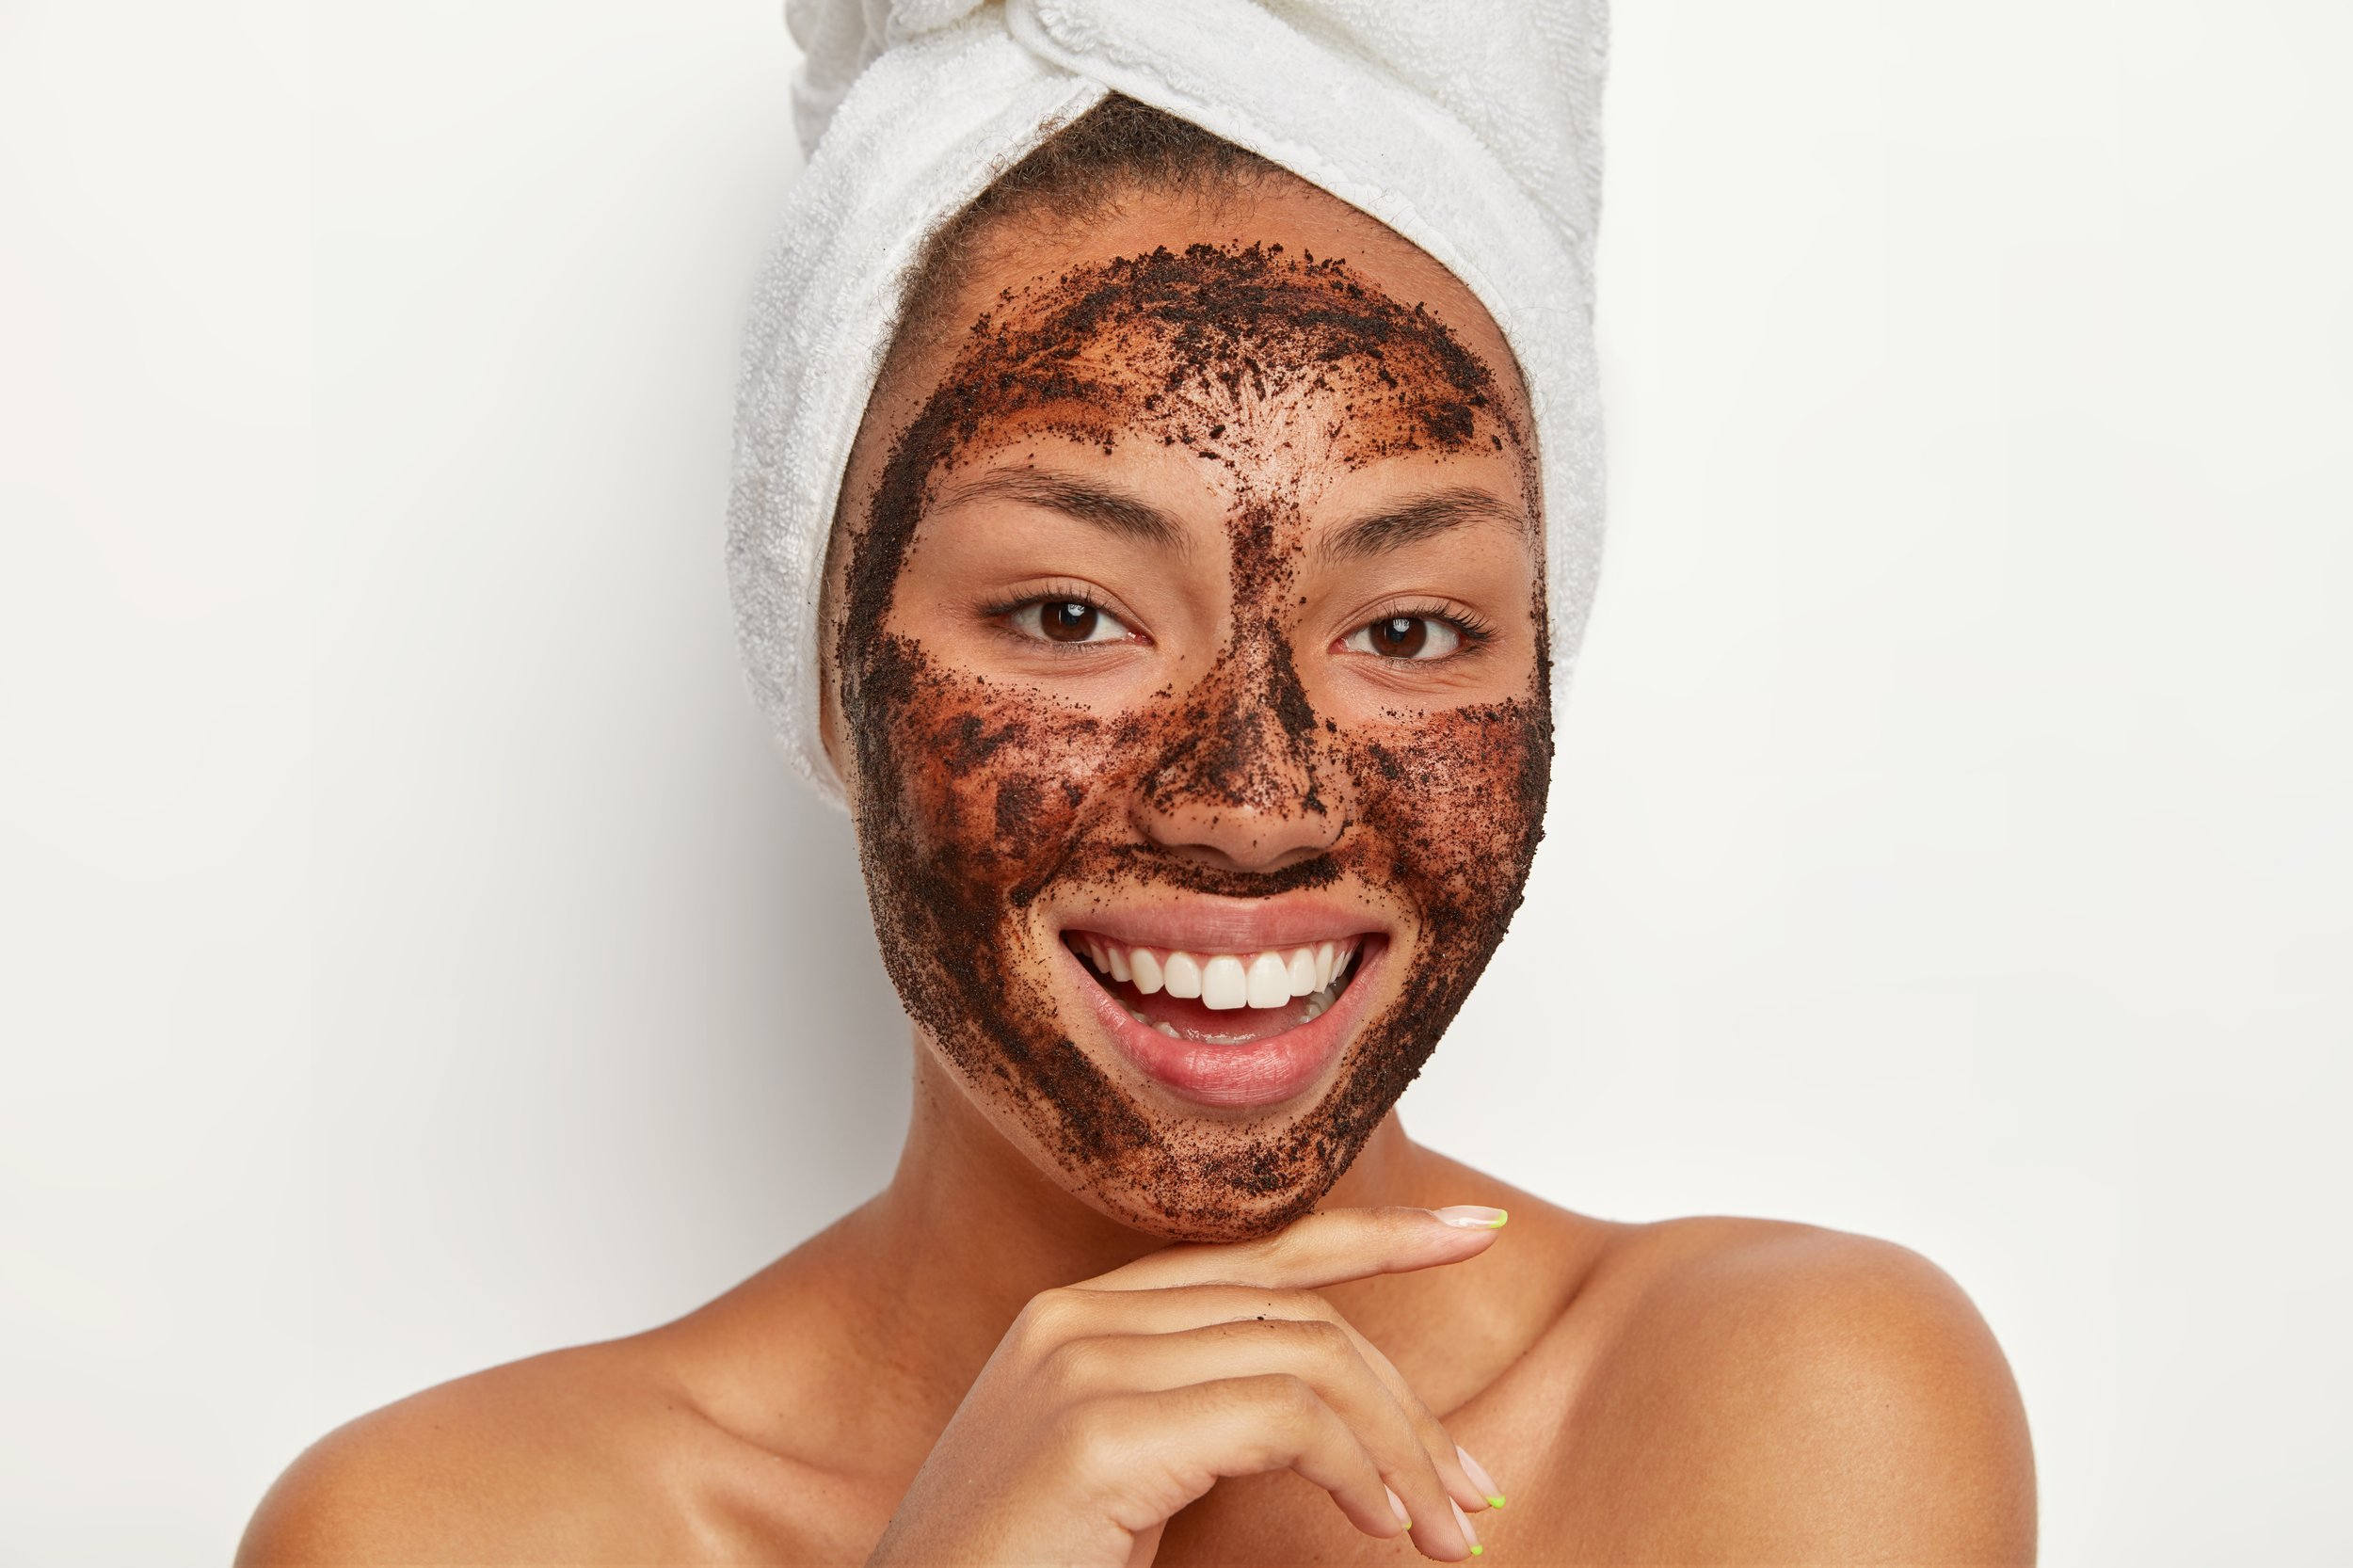 close-up-portrait-happy-afro-woman-touches-chin-gently-smiles-broadly-shows-white-teeth-cleans-face-applies-coffee-scrub-mask-wears-wrapped-towel-wet-hair-after-taking-bath-skin-care (1).jpg